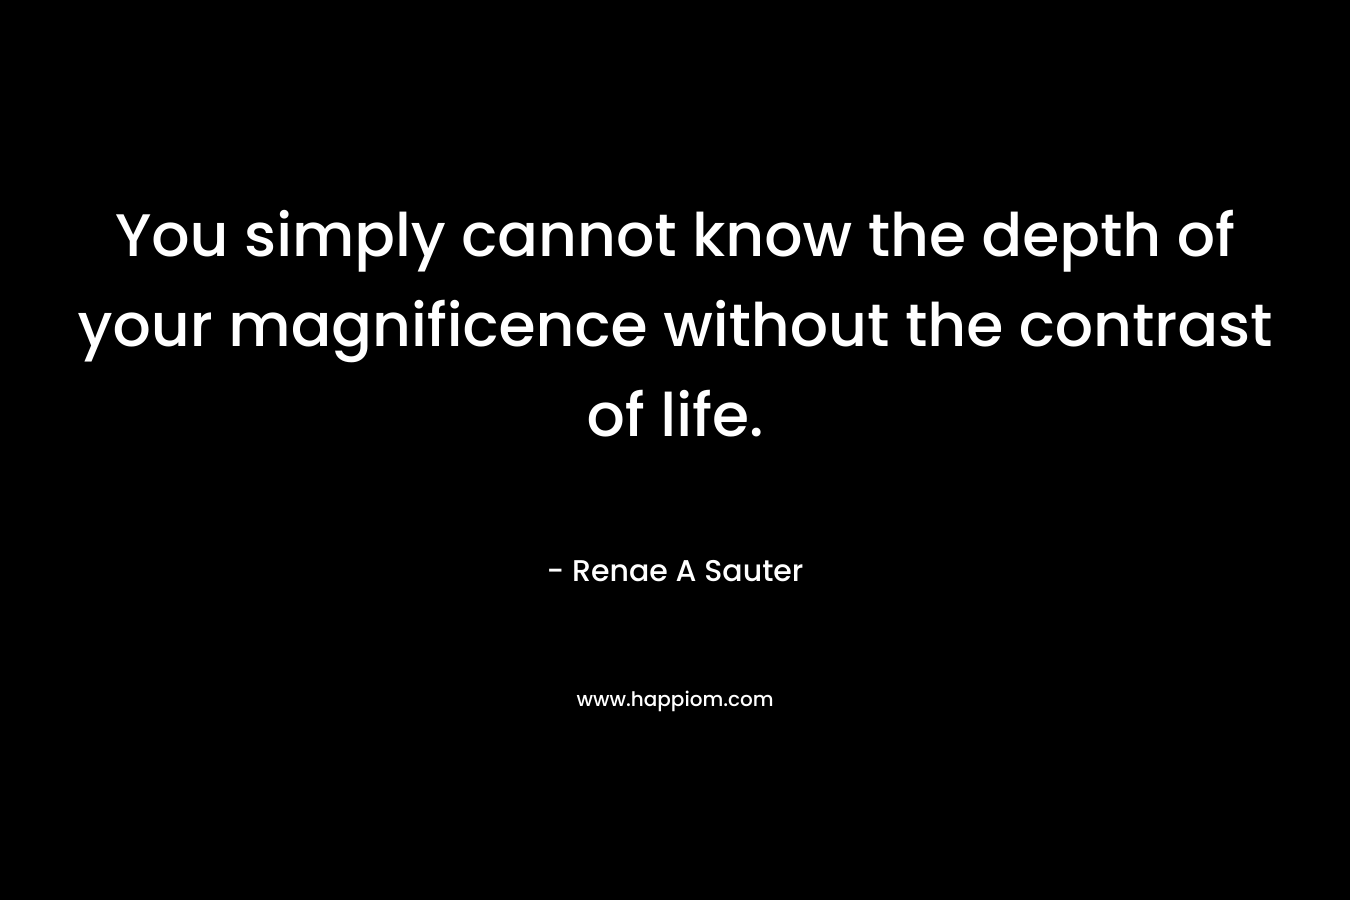 You simply cannot know the depth of your magnificence without the contrast of life.